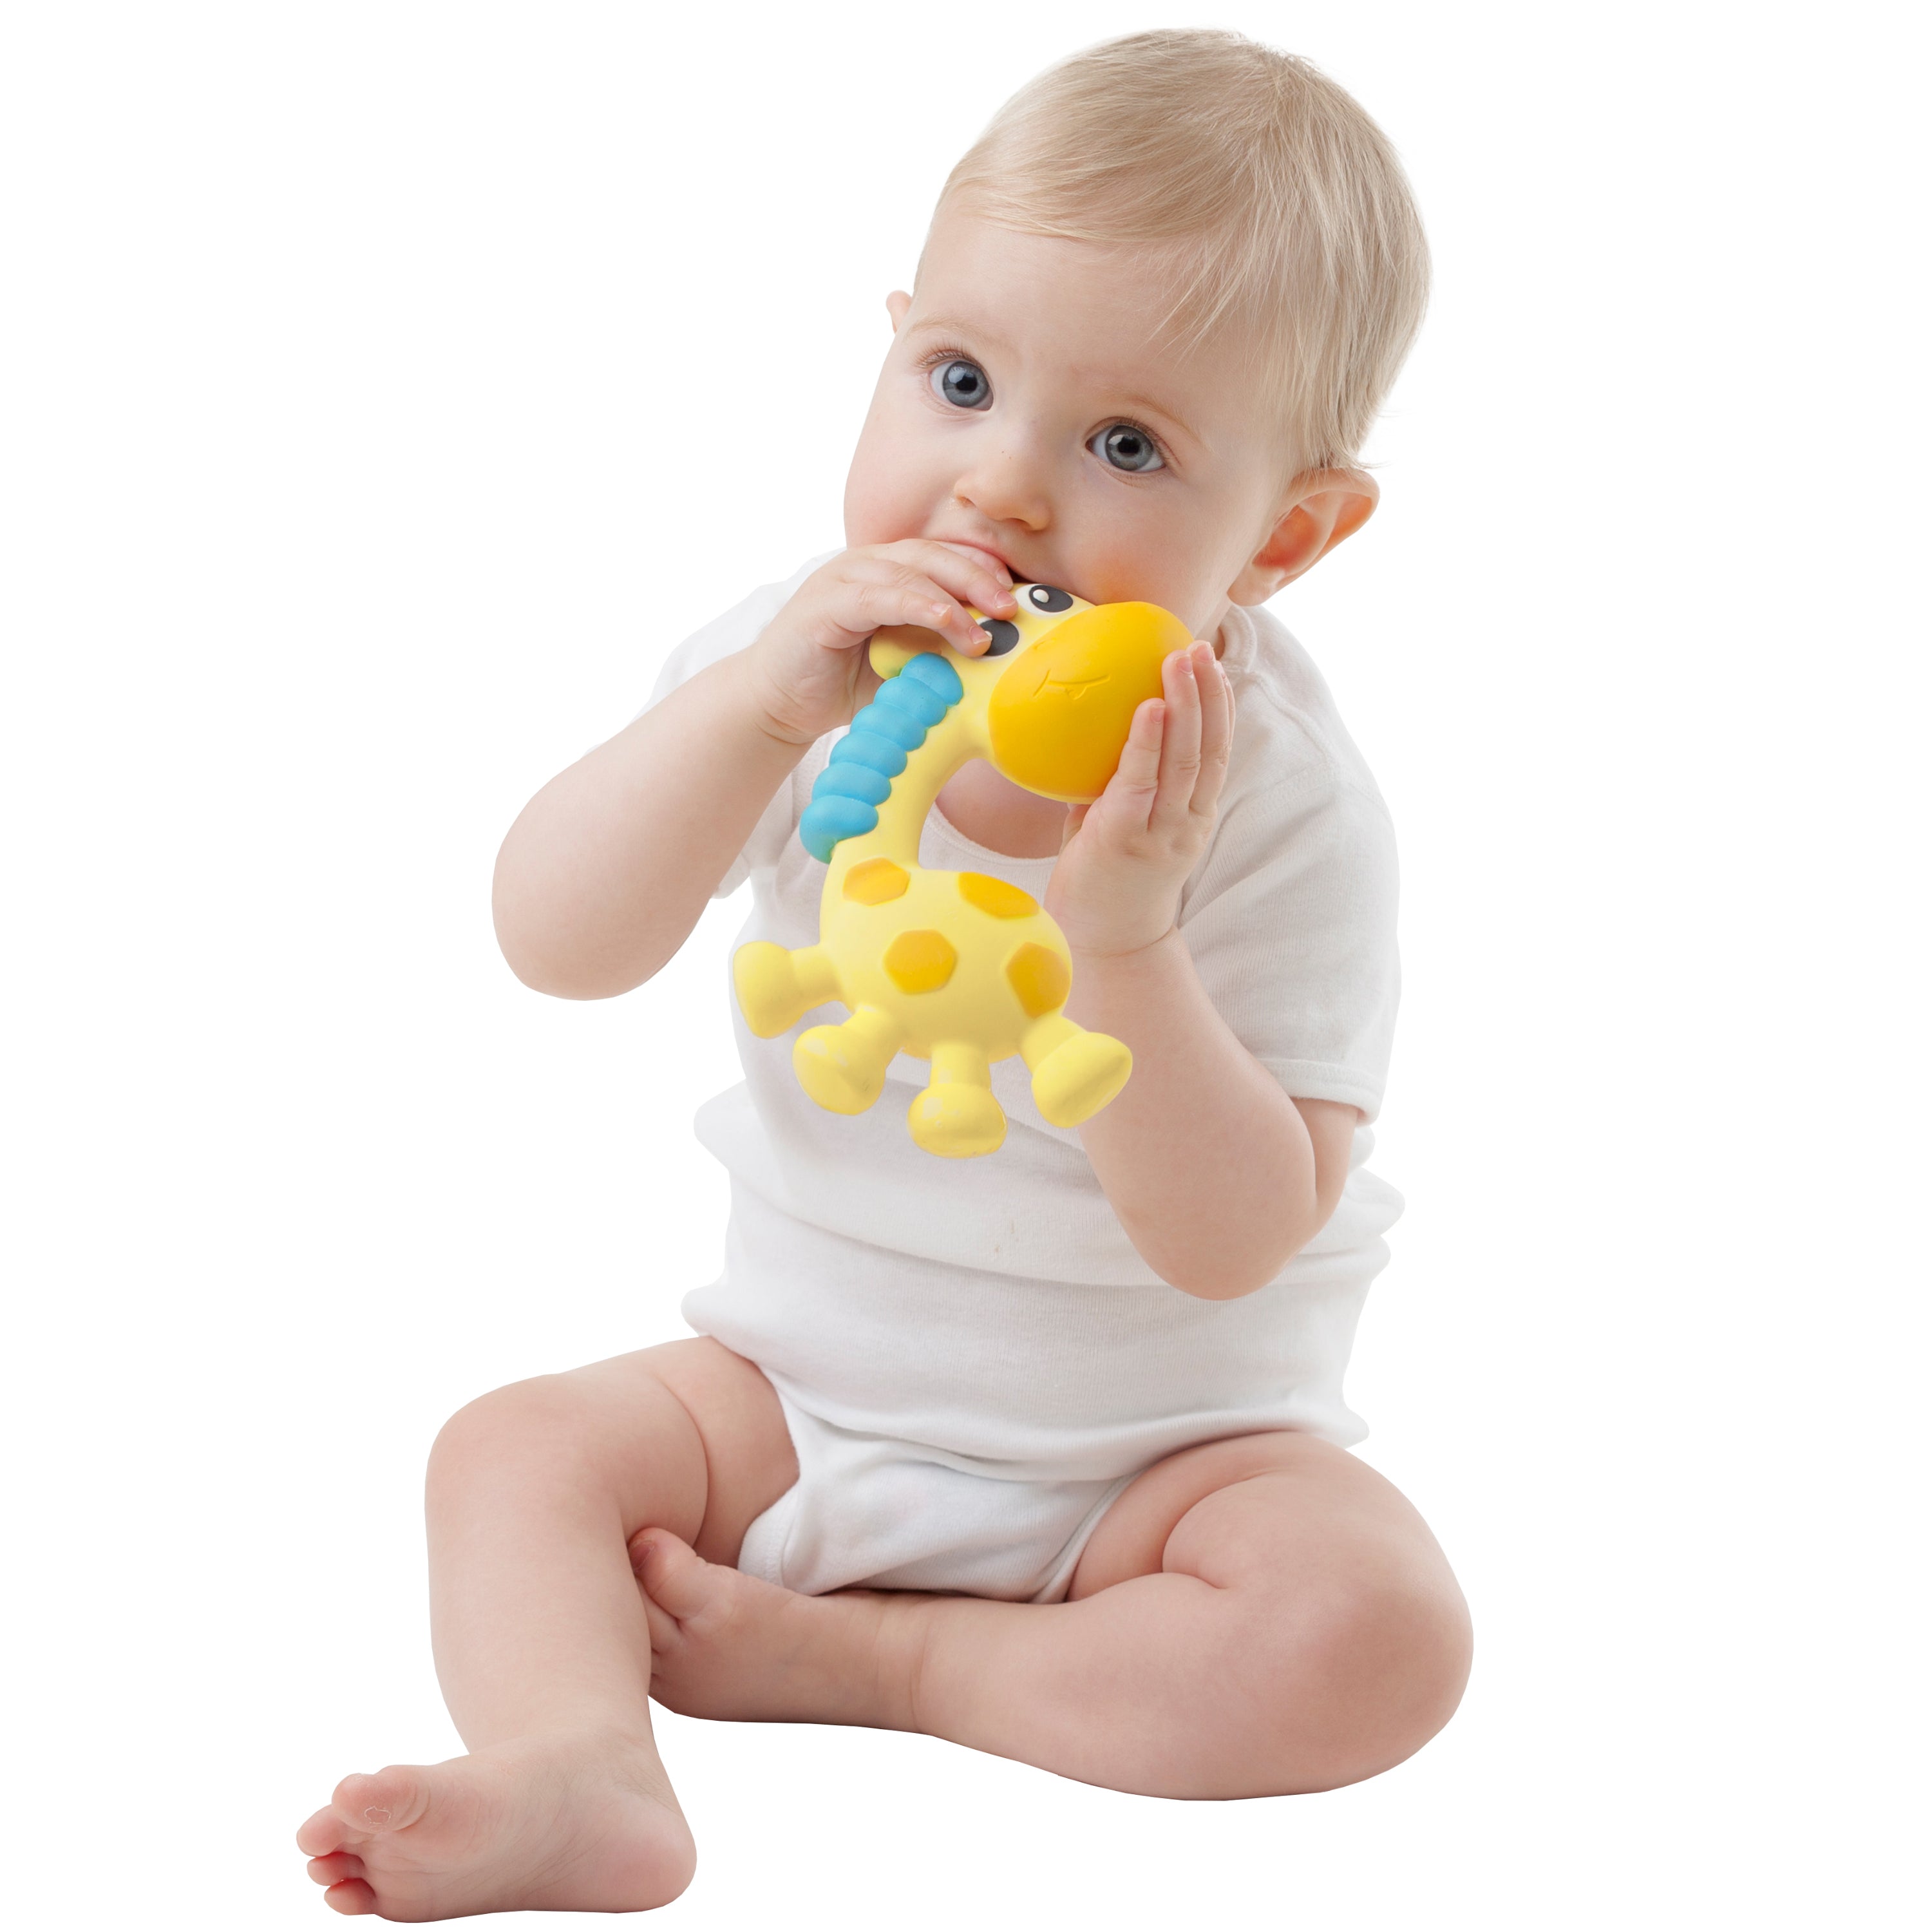 A baby toddler teething on Playgro Jerry natural teether in Giraffe design